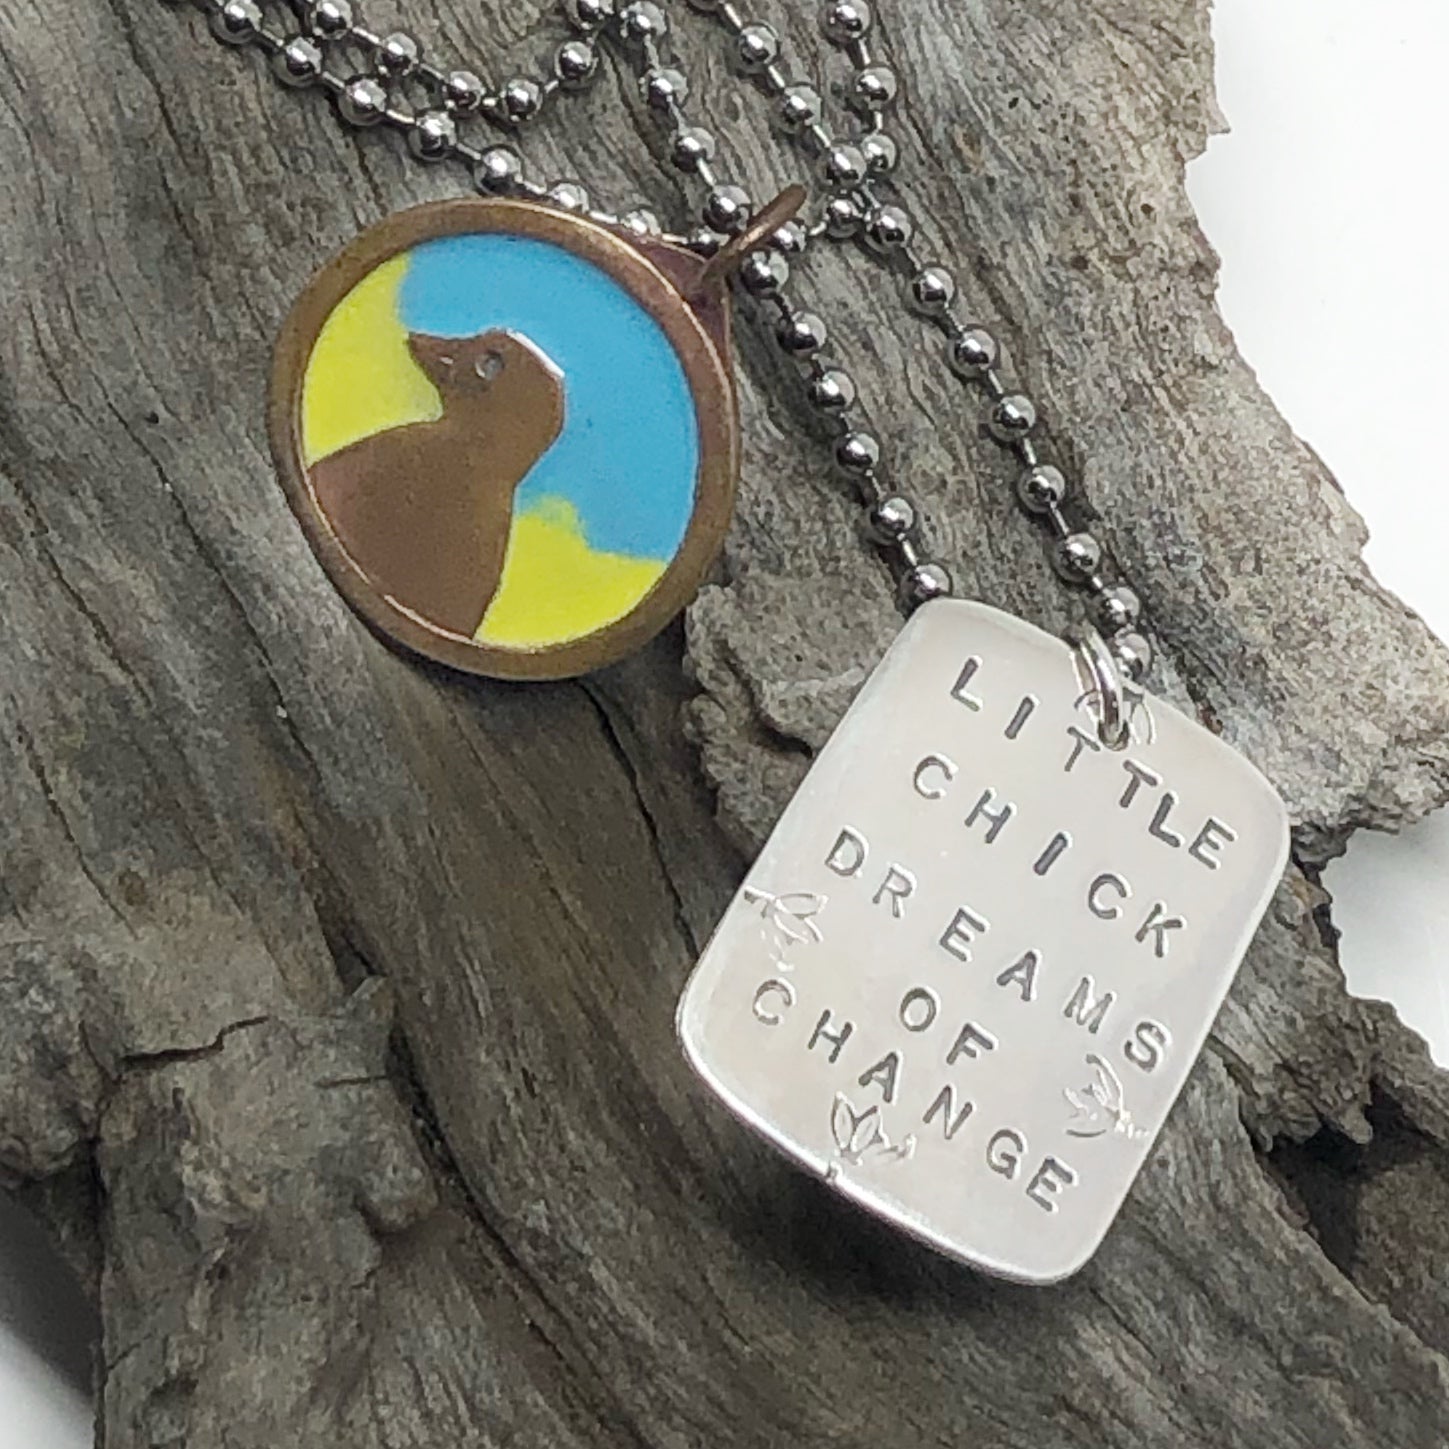 Little Chick Dreams Of Change for the Environment - pendant Set